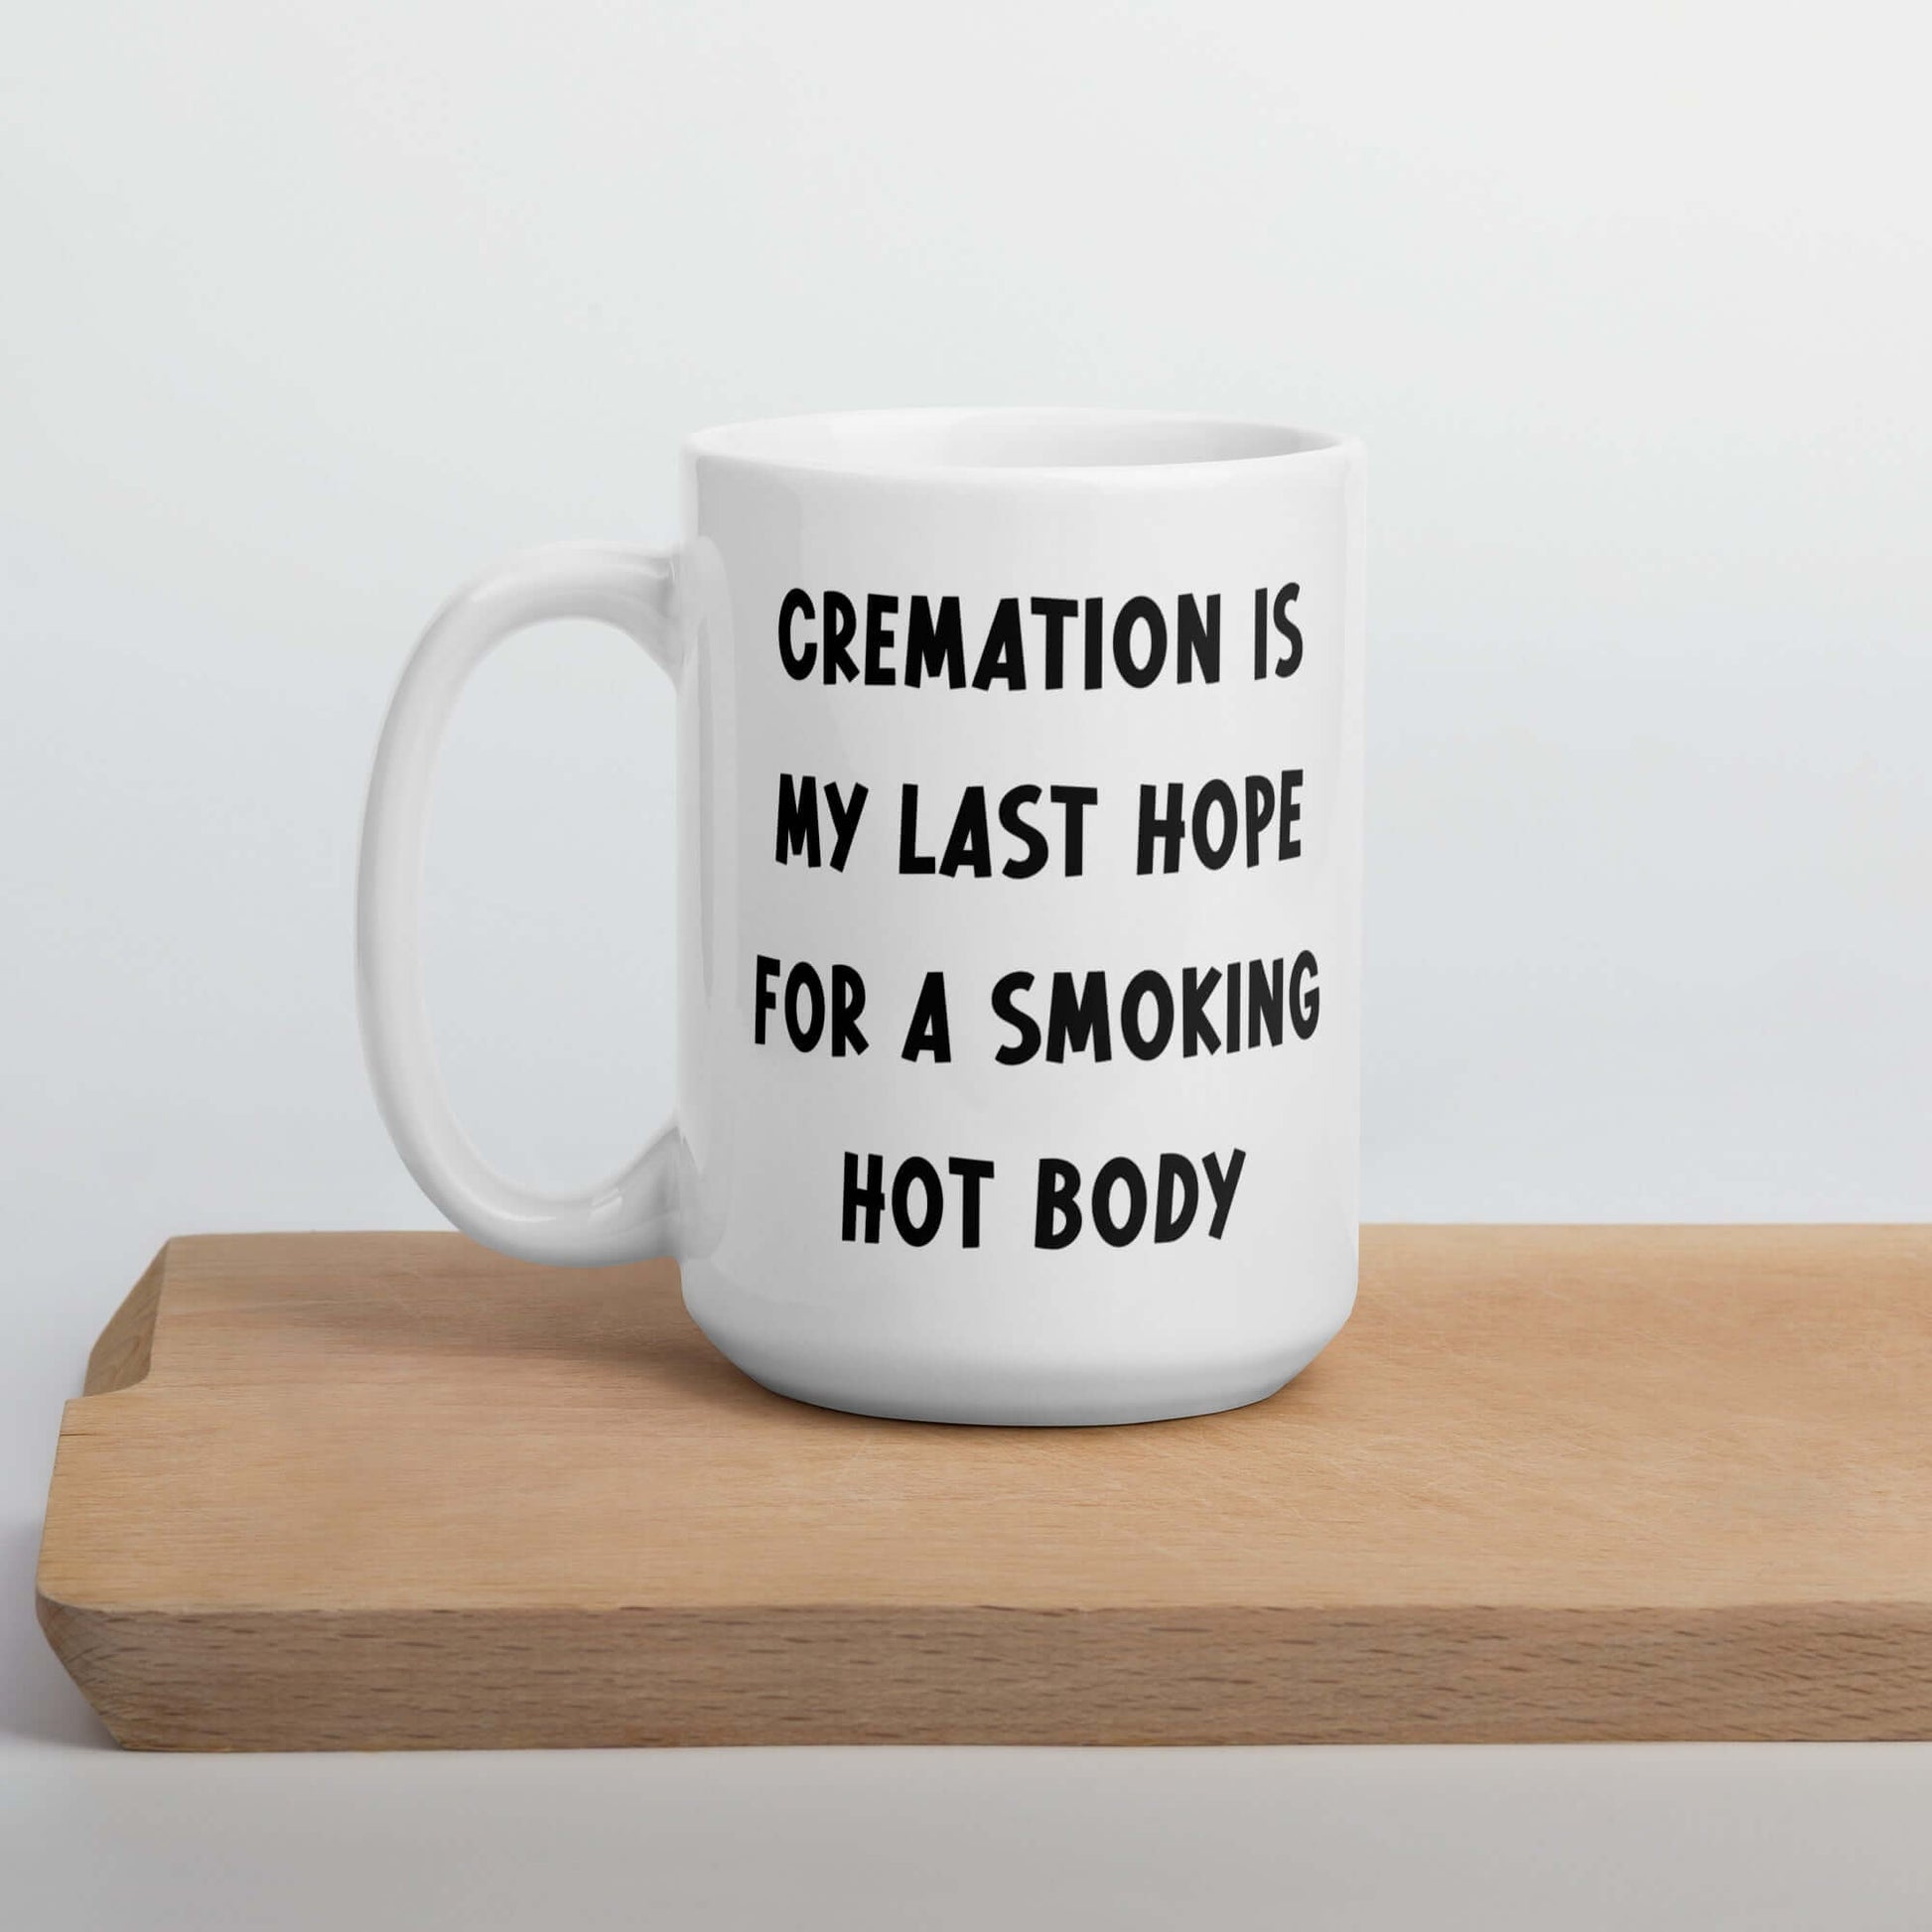 White ceramic mug with the words Cremation is my last hope for a smoking hot body printed on both sides.